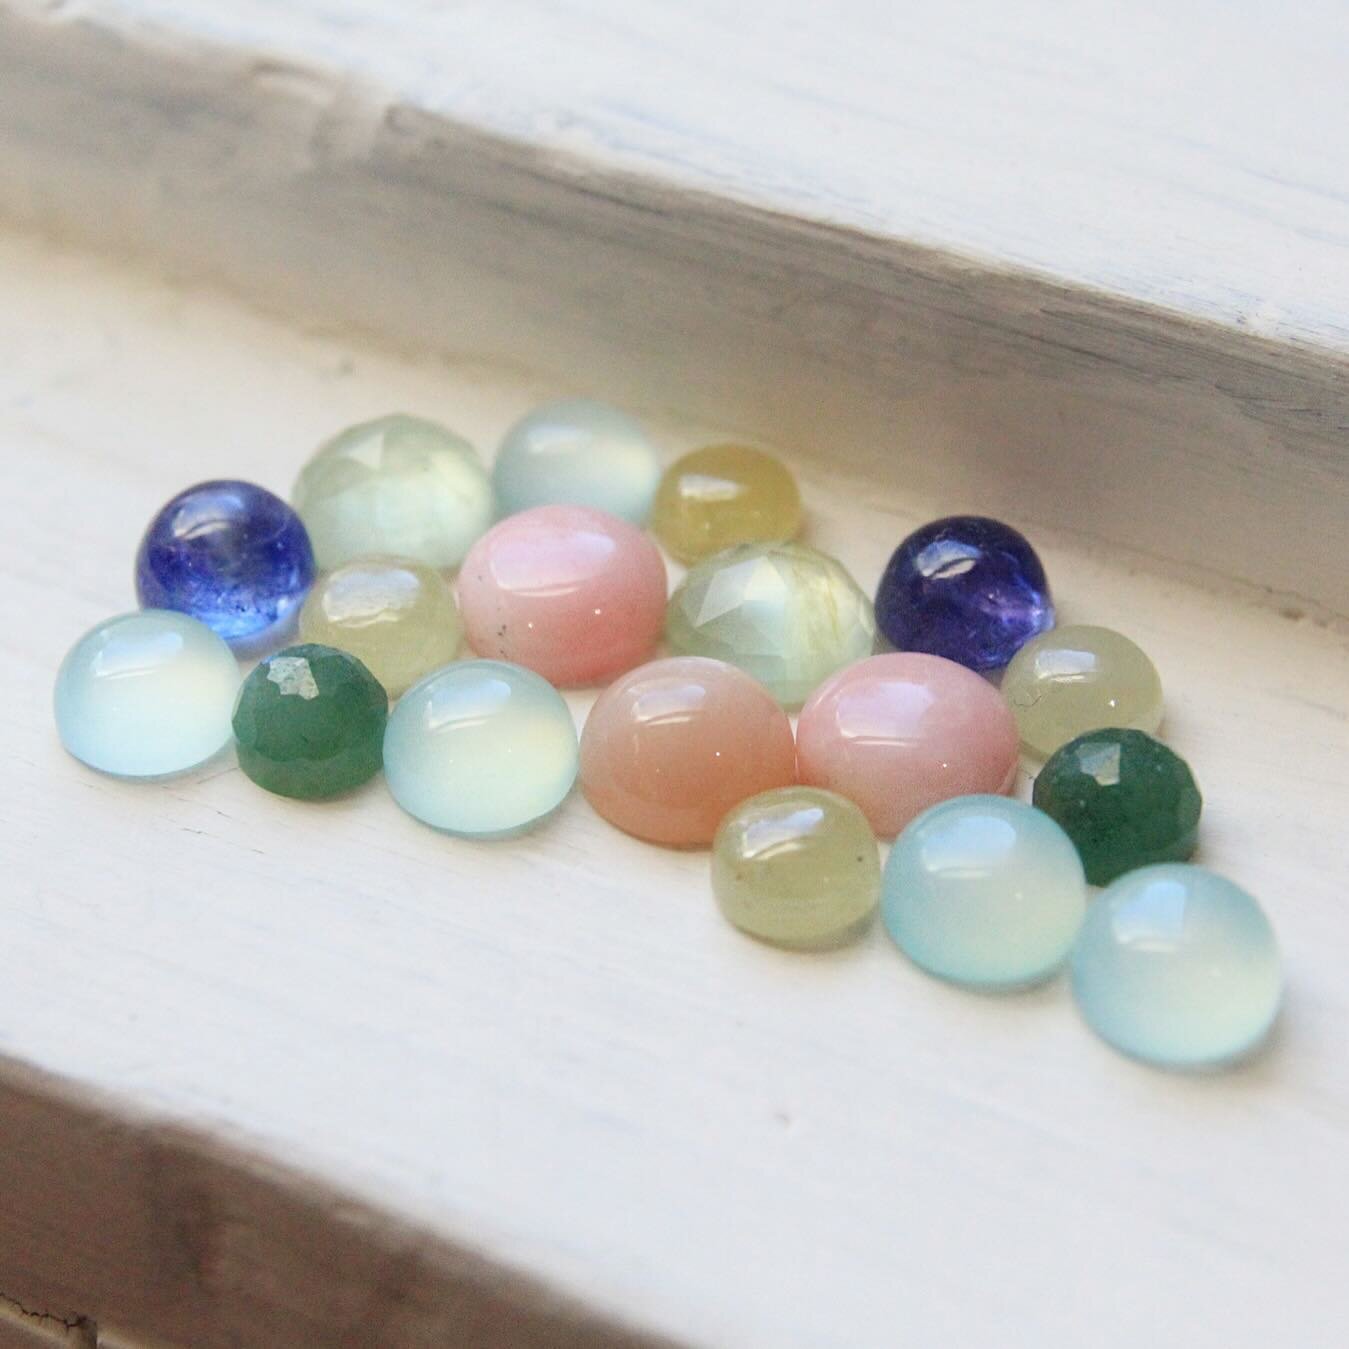 Pre-orders for the spring line are now open!💐This line includes peach moonstone, pink opal, yellow sapphire, blue chalcedony, tanzanite, and sparkly rose cut prehnite and green aventurine.
🌷🪻🌻
Each of these will be made into sterling silver rings